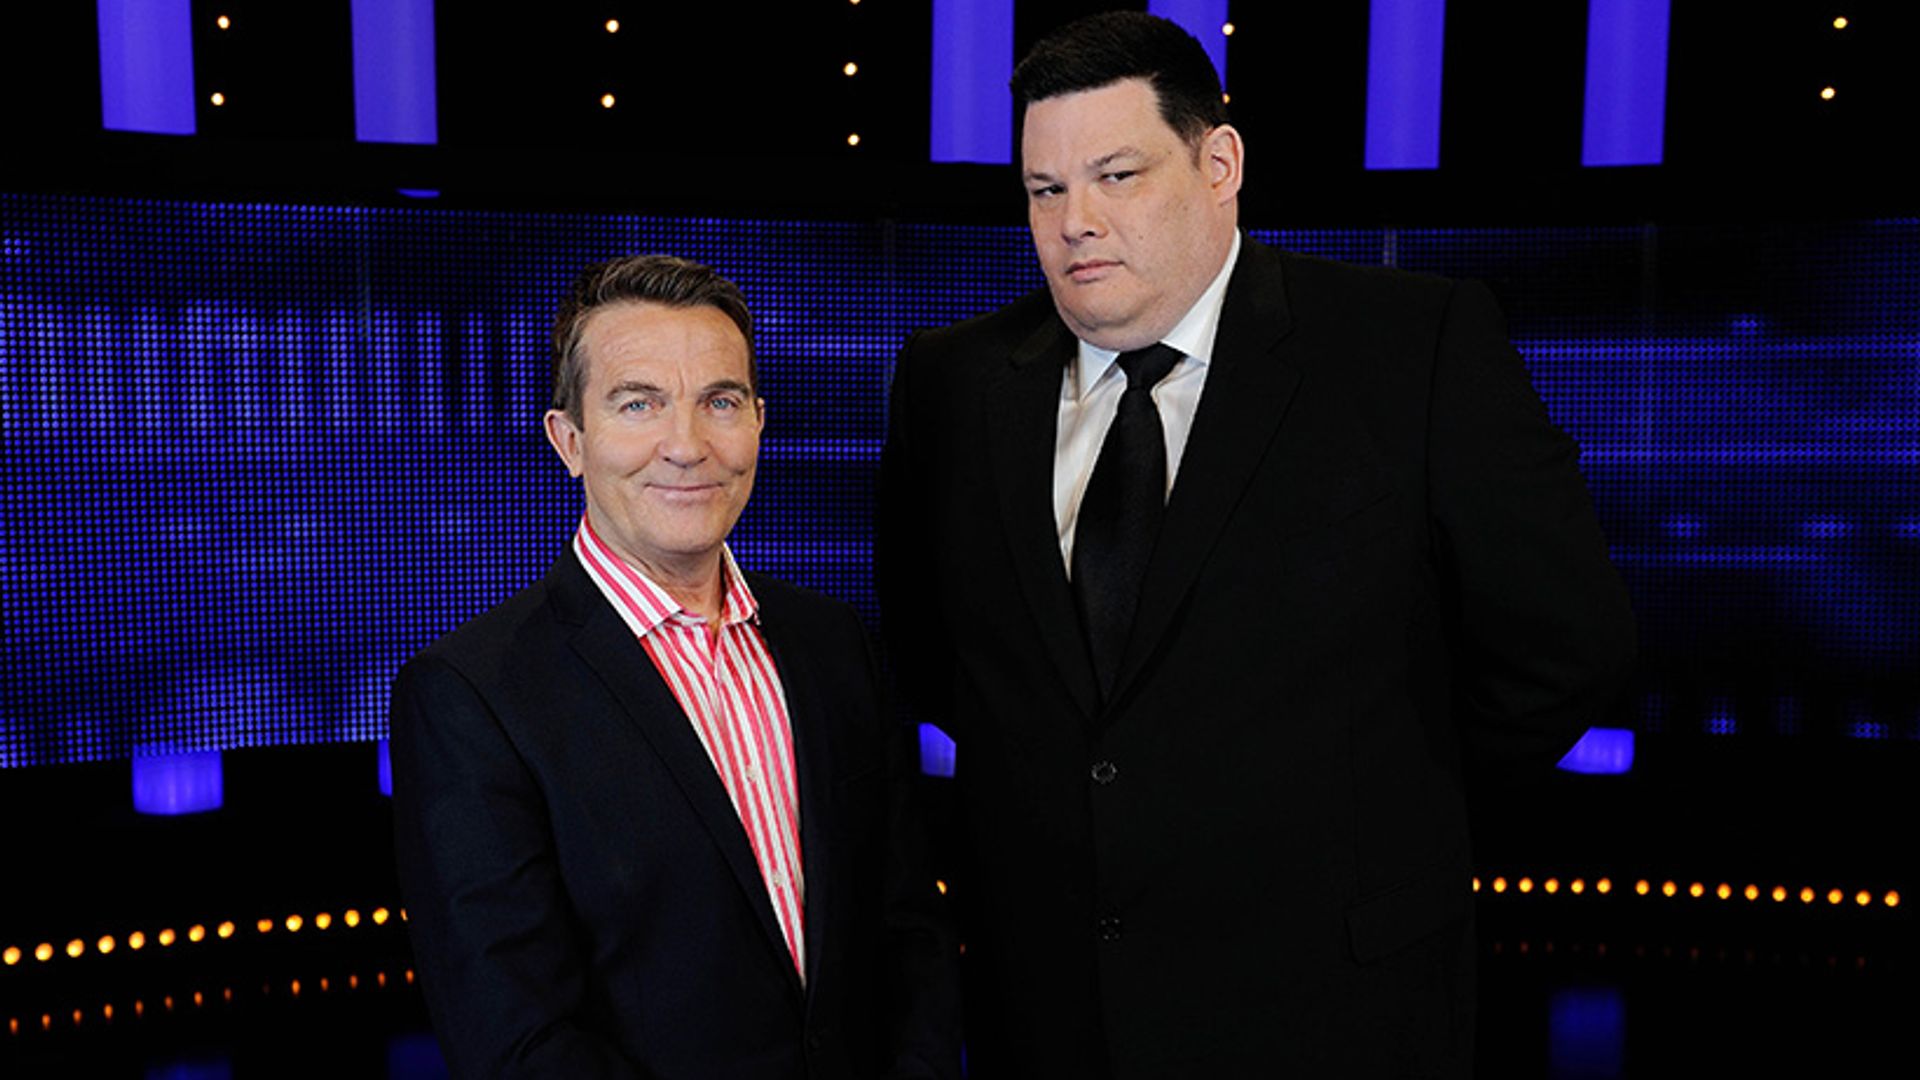 The Chase's 'Beast' Mark Labbett would take 'Jeremy Kyle lie detector' to prove show isn't fixed